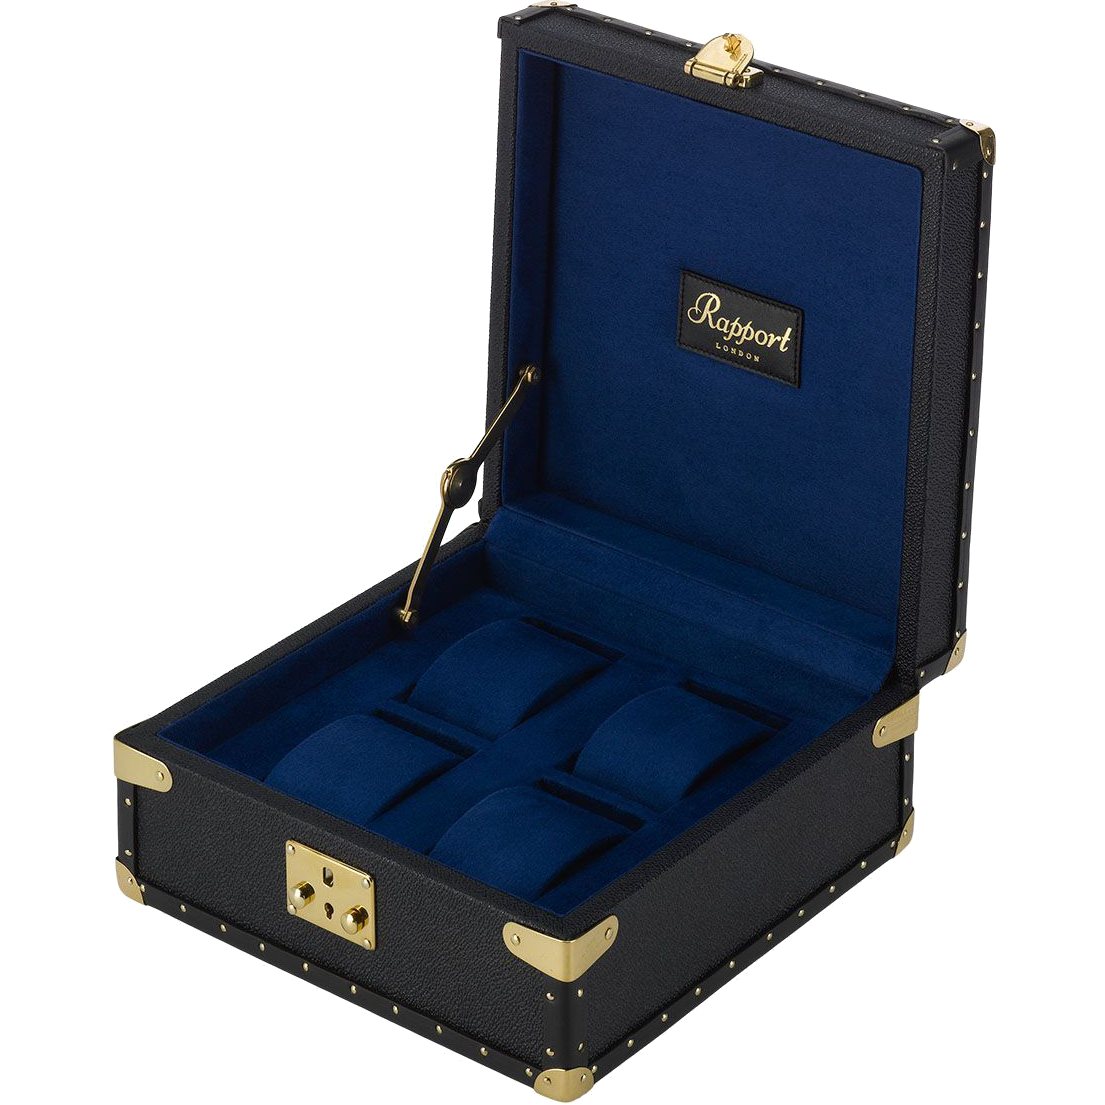 Rapport Classic Collector Watch Box Quad in Blue Leather L305 - Watchwindersplus